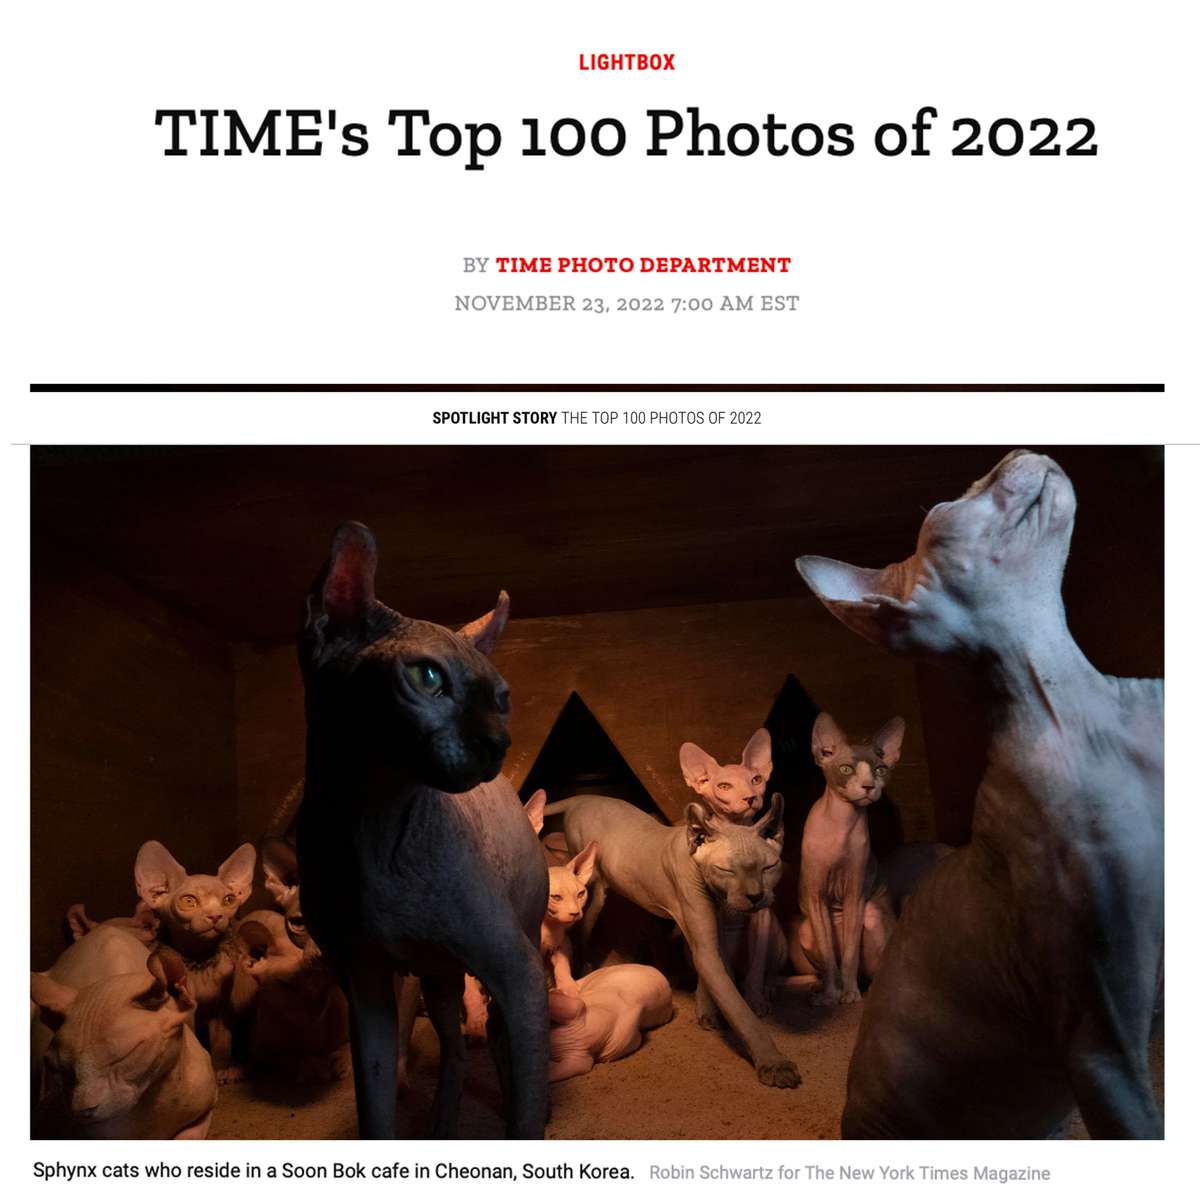  TIME's Top 100 Photos of 2022 https://time.com/6234958/top-100-photos-2022/ What an honor to be included 